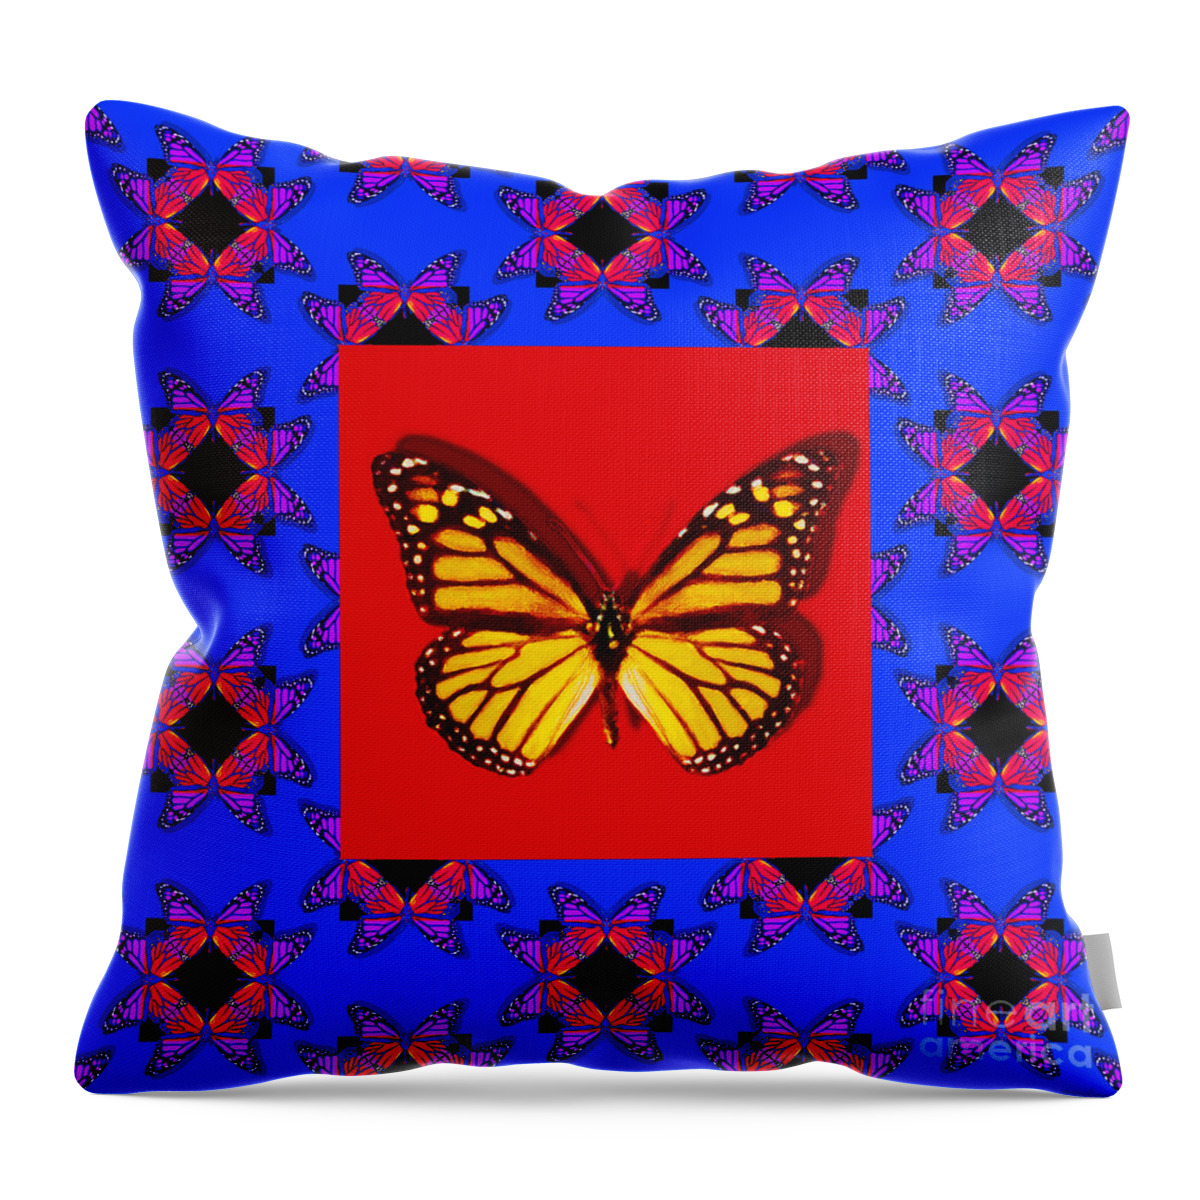 Butterfly Throw Pillow featuring the photograph Monarch Butterfly Abstract Window 20130203m133 by Wingsdomain Art and Photography